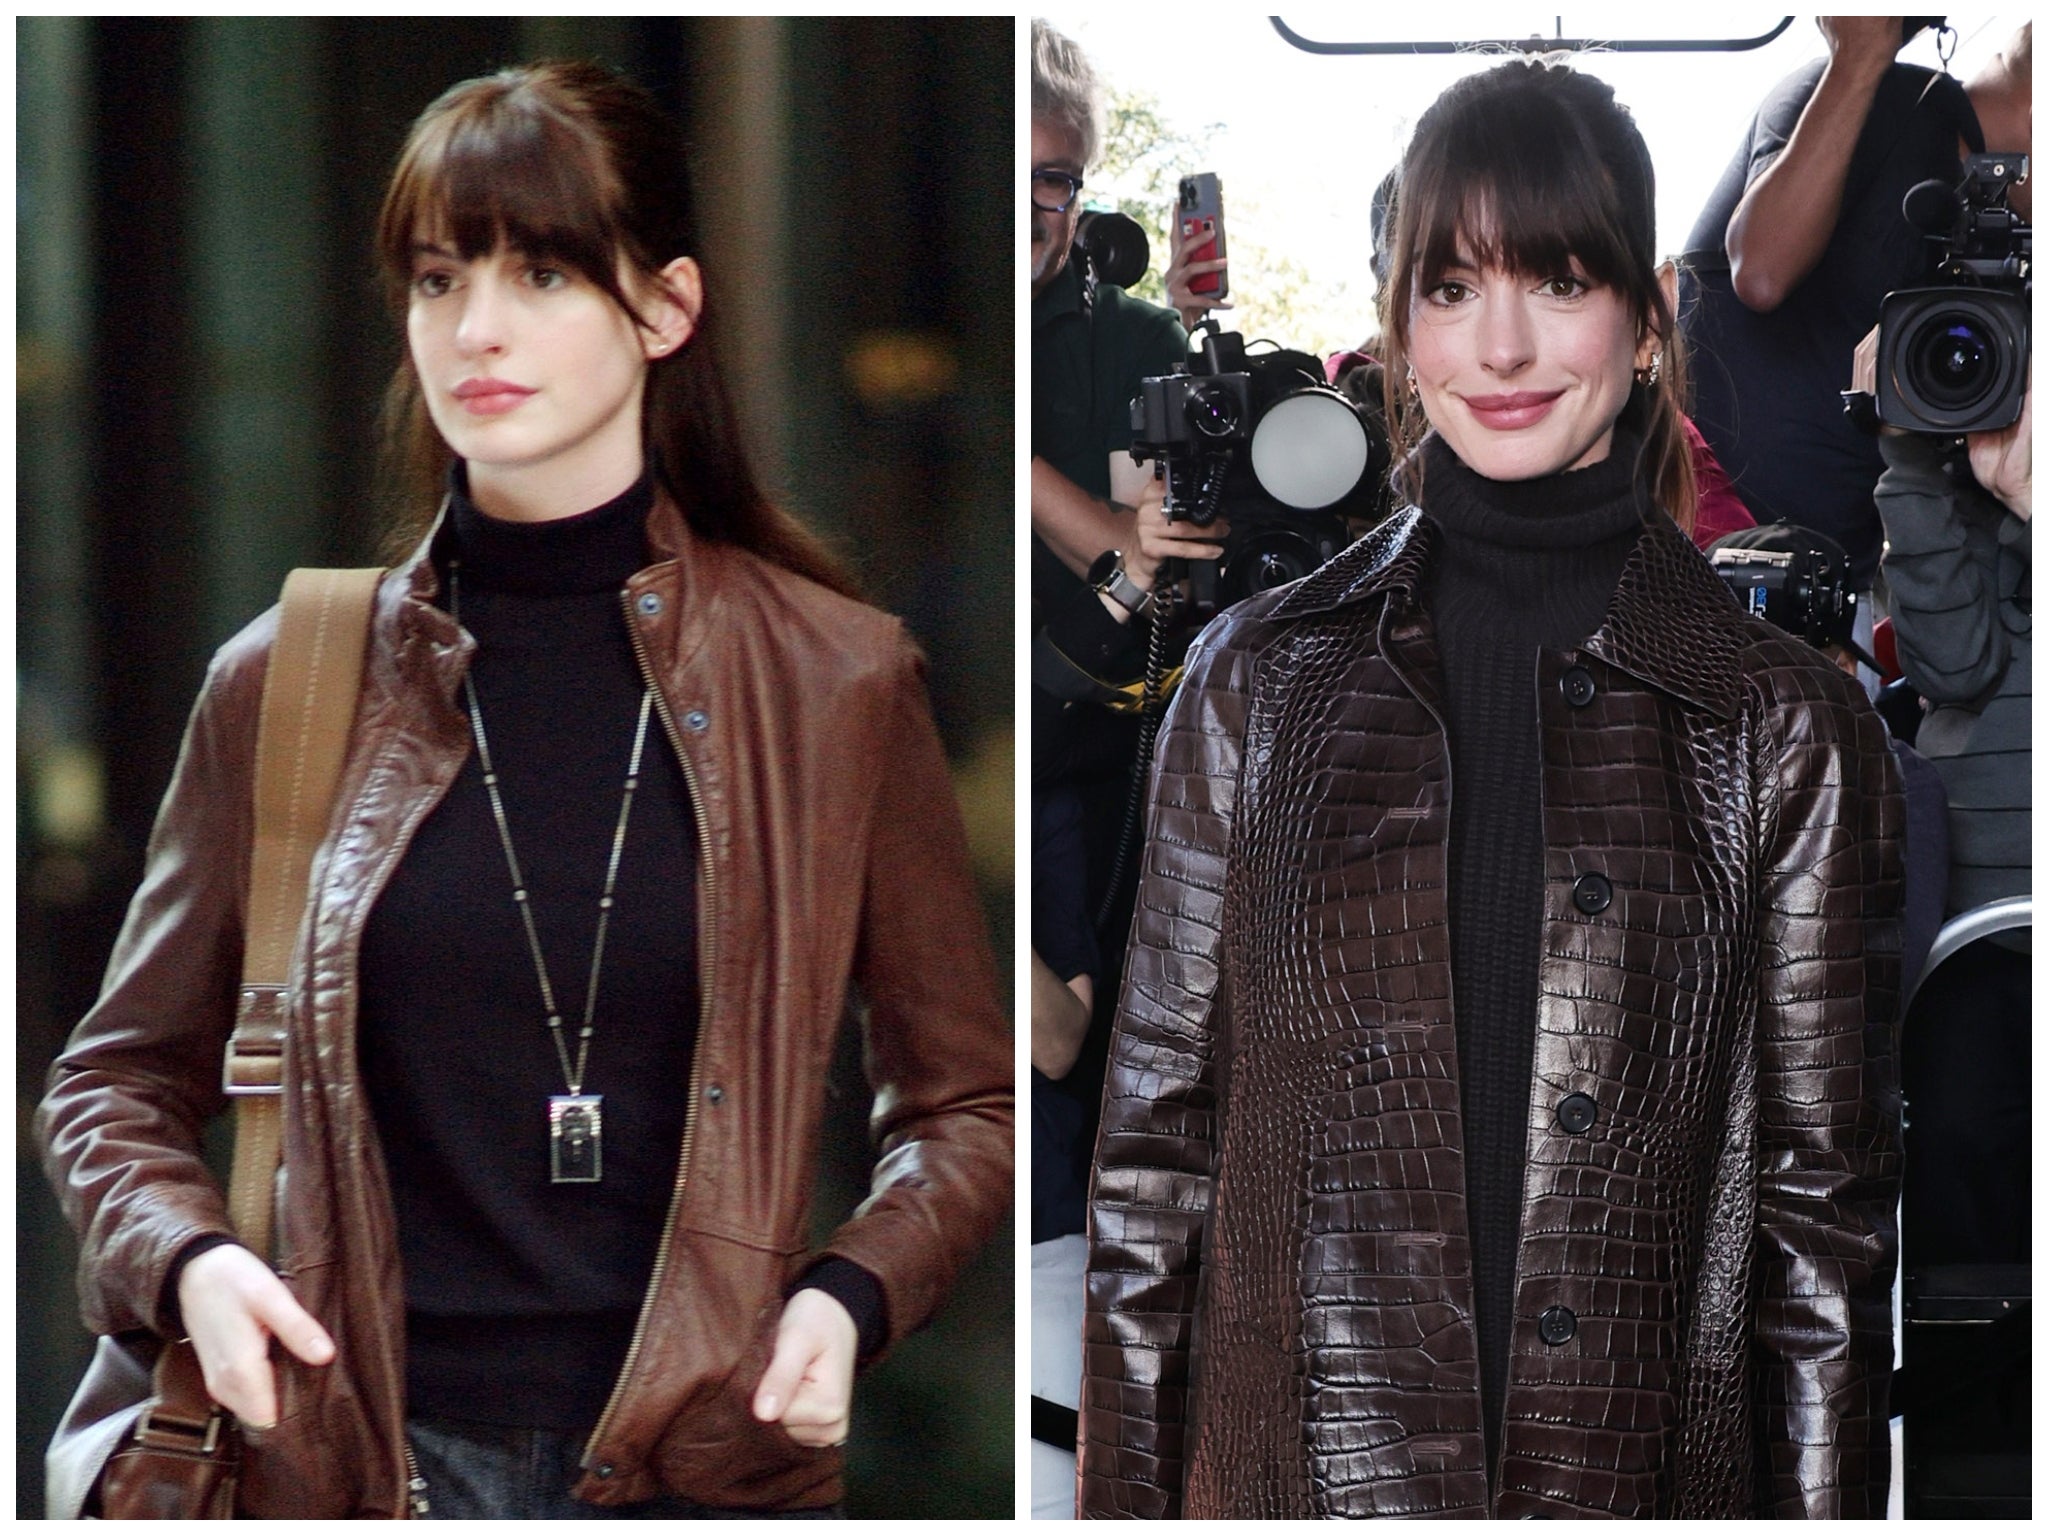 Anne Hathaway channels Devil Wears Prada character with NYFW look: 'Full  circle moment' | The Independent